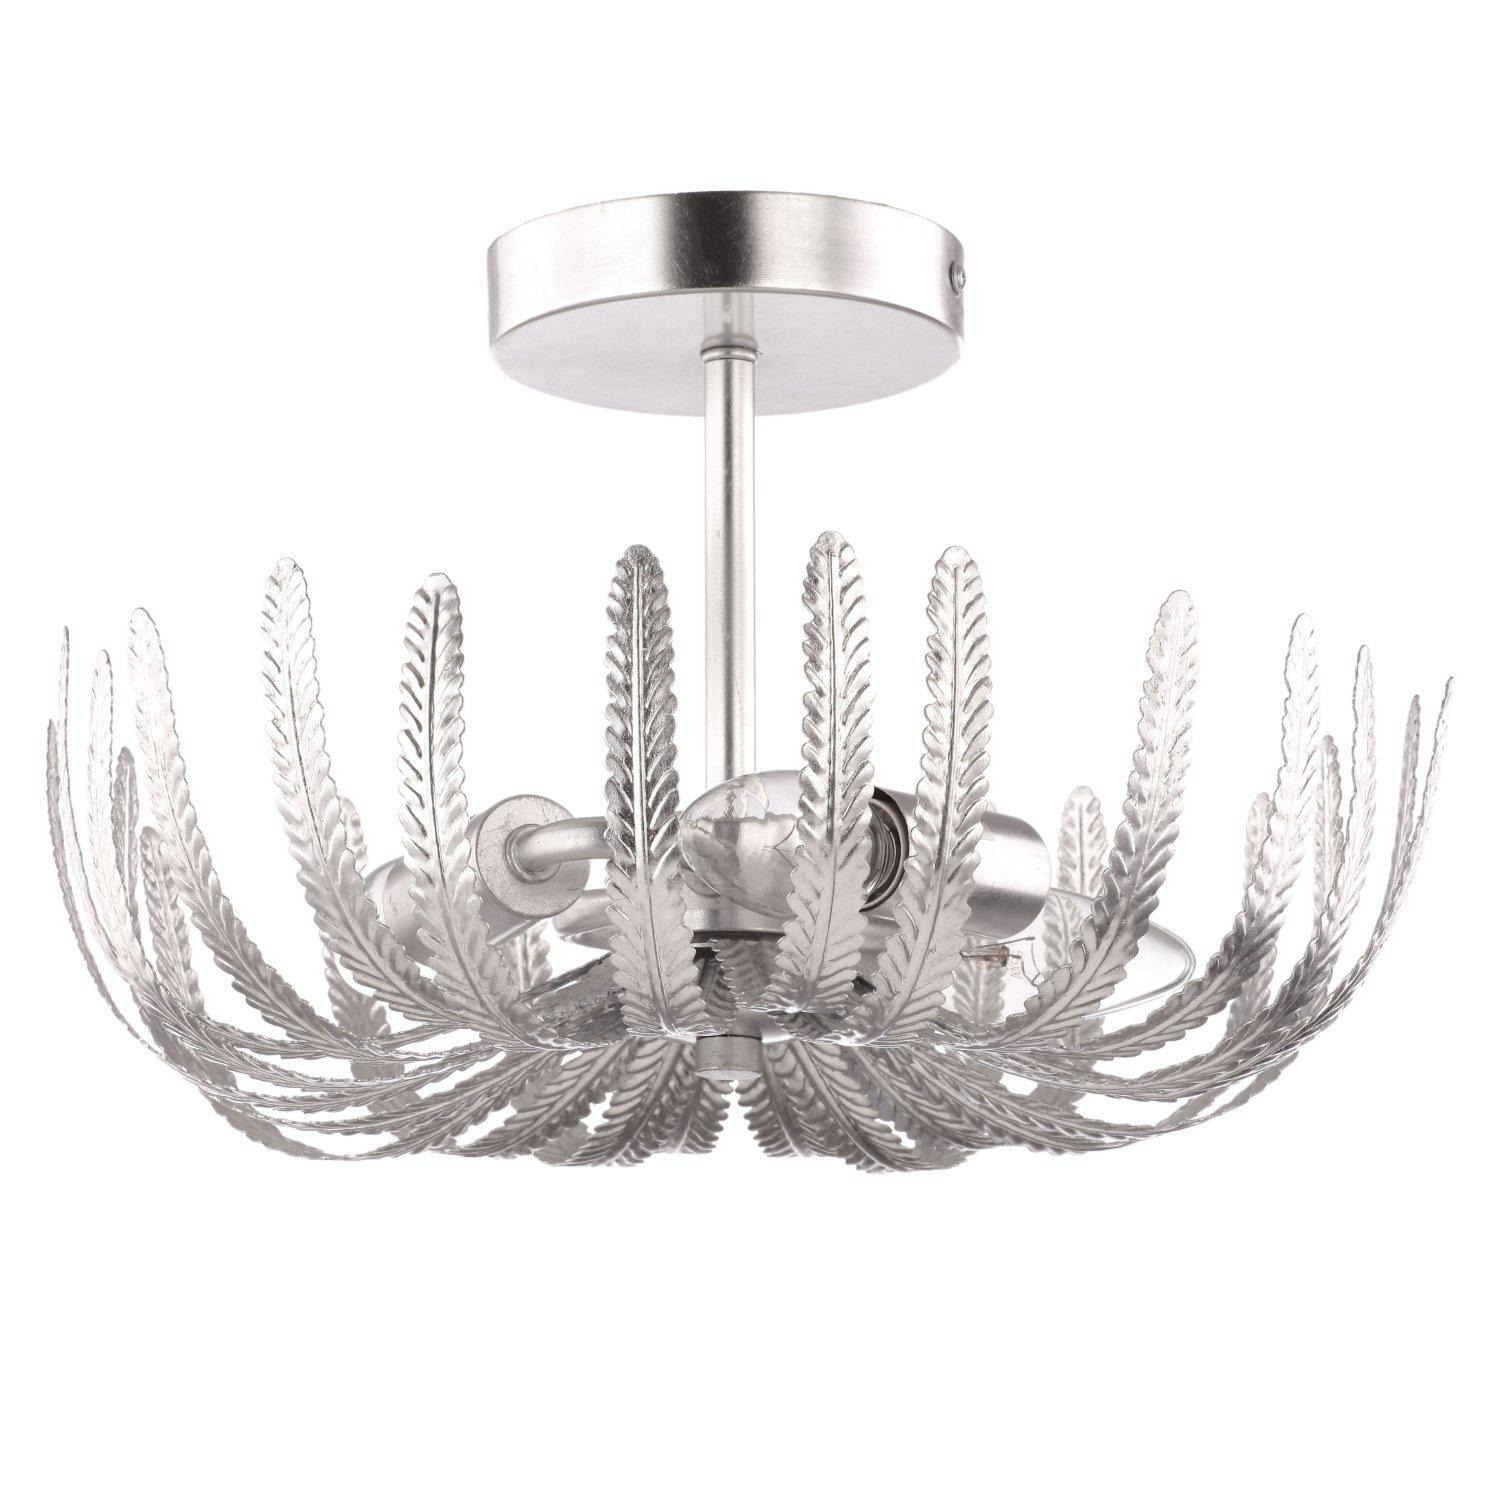 Contemporary and Ornate Foil Finish Semi Flush Ceiling Light with Fern Stems - image 1